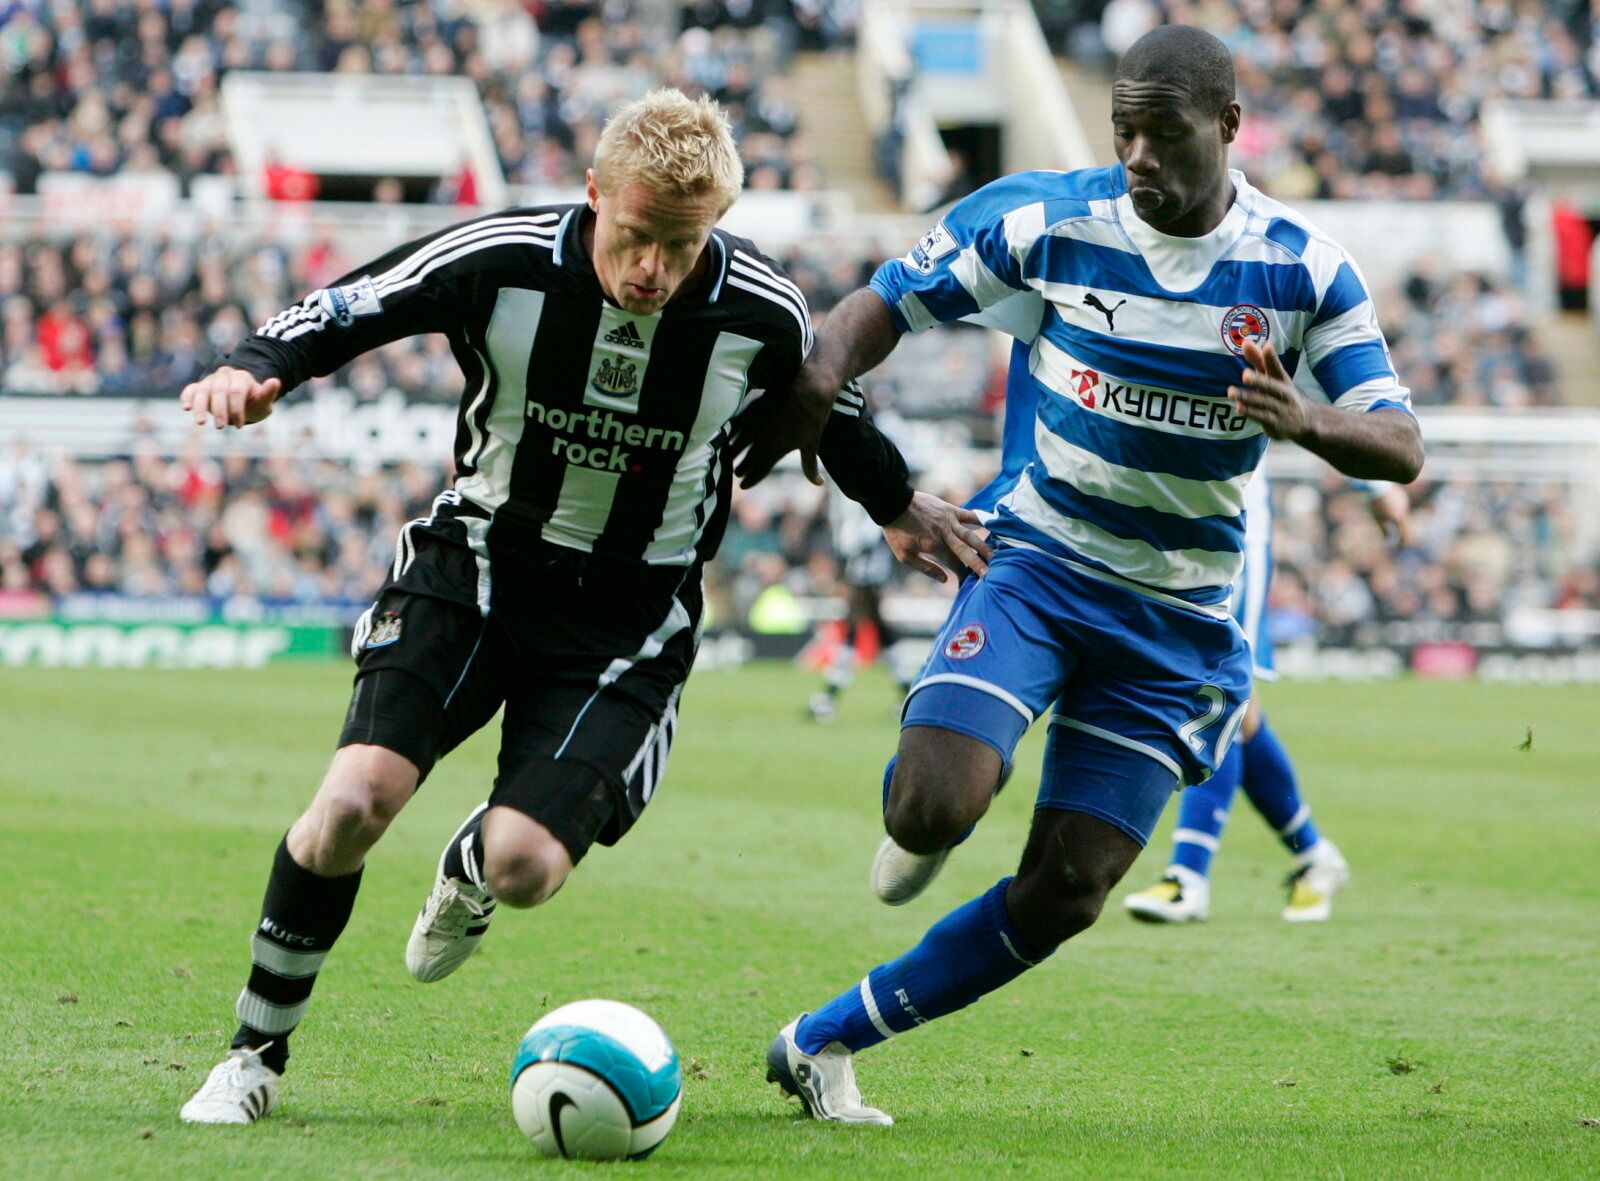 Football - Newcastle United v Reading - Barclays Premier League - St James Park - 07/08 , 5/4/08 
Damien Duff - Newcastle United in action against Emerse Fae  - Reading 
Mandatory Credit: Action Images / Lee Smith 
NO ONLINE/INTERNET USE WITHOUT A LICENCE FROM THE FOOTBALL DATA CO LTD. FOR LICENCE ENQUIRIES PLEASE TELEPHONE +44 (0) 207 864 9000.